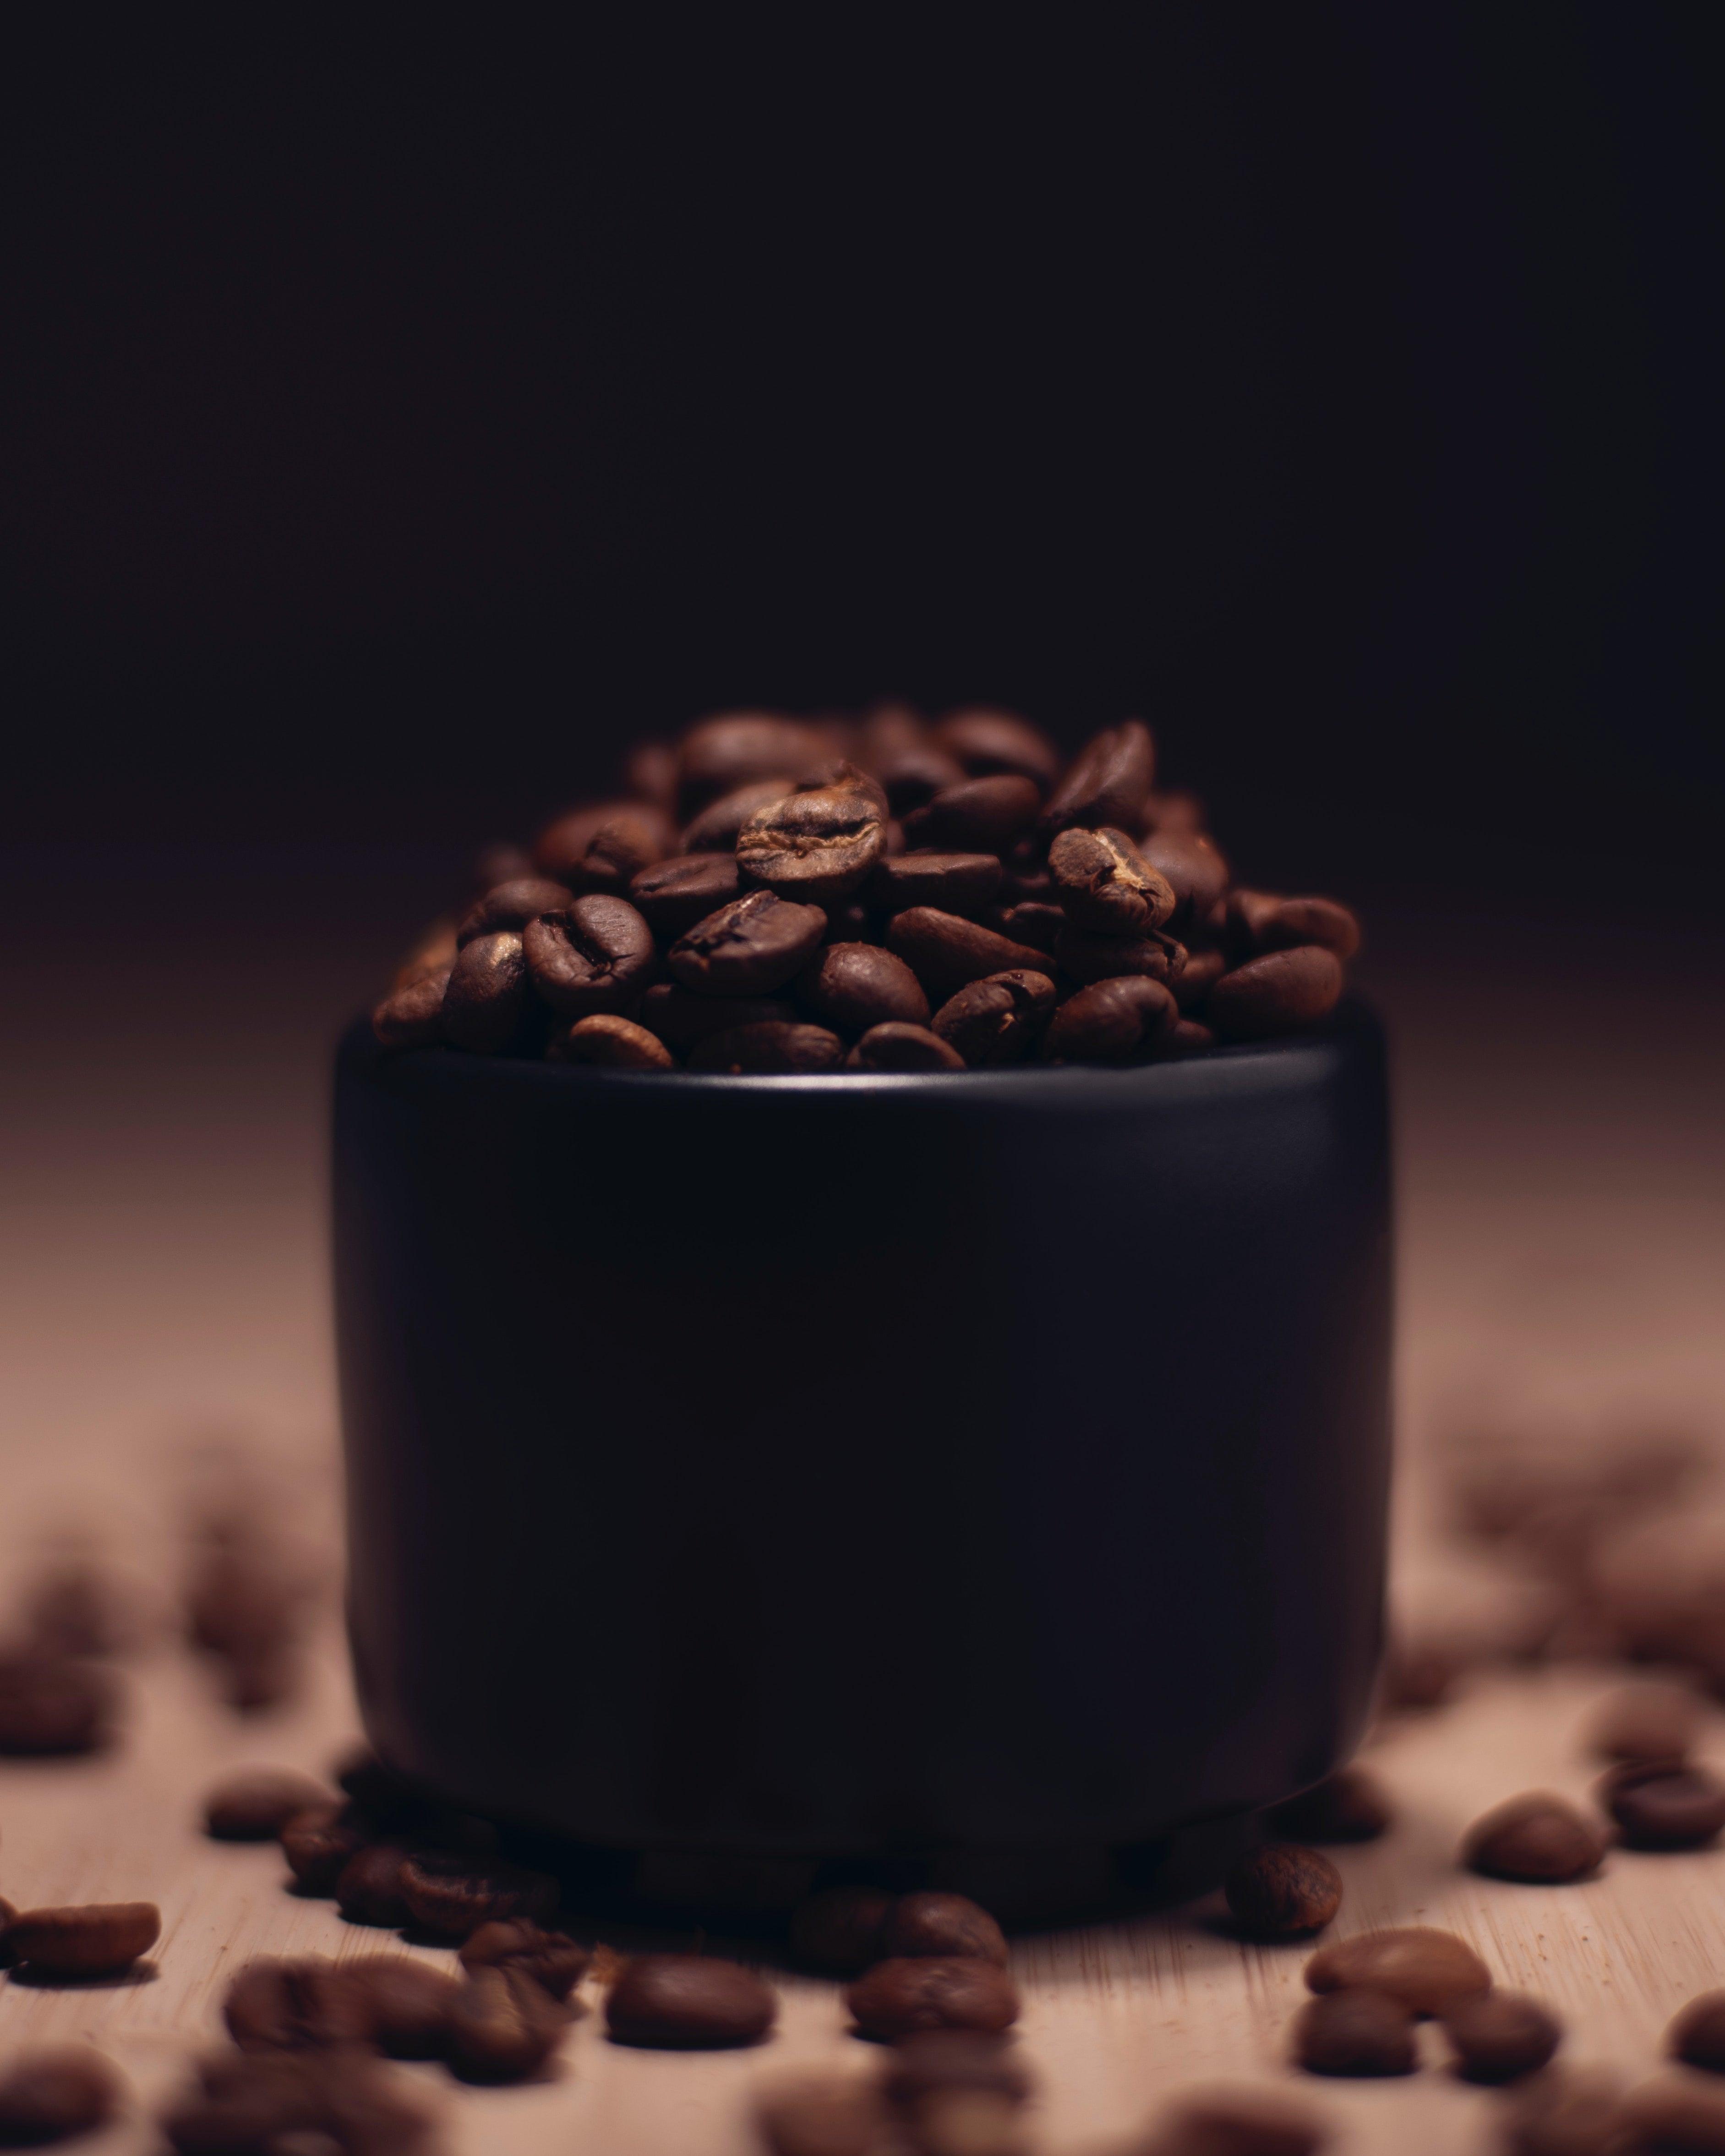 abed-ismail-X8M3GzAASFE-unsplash - COFFEEBRE